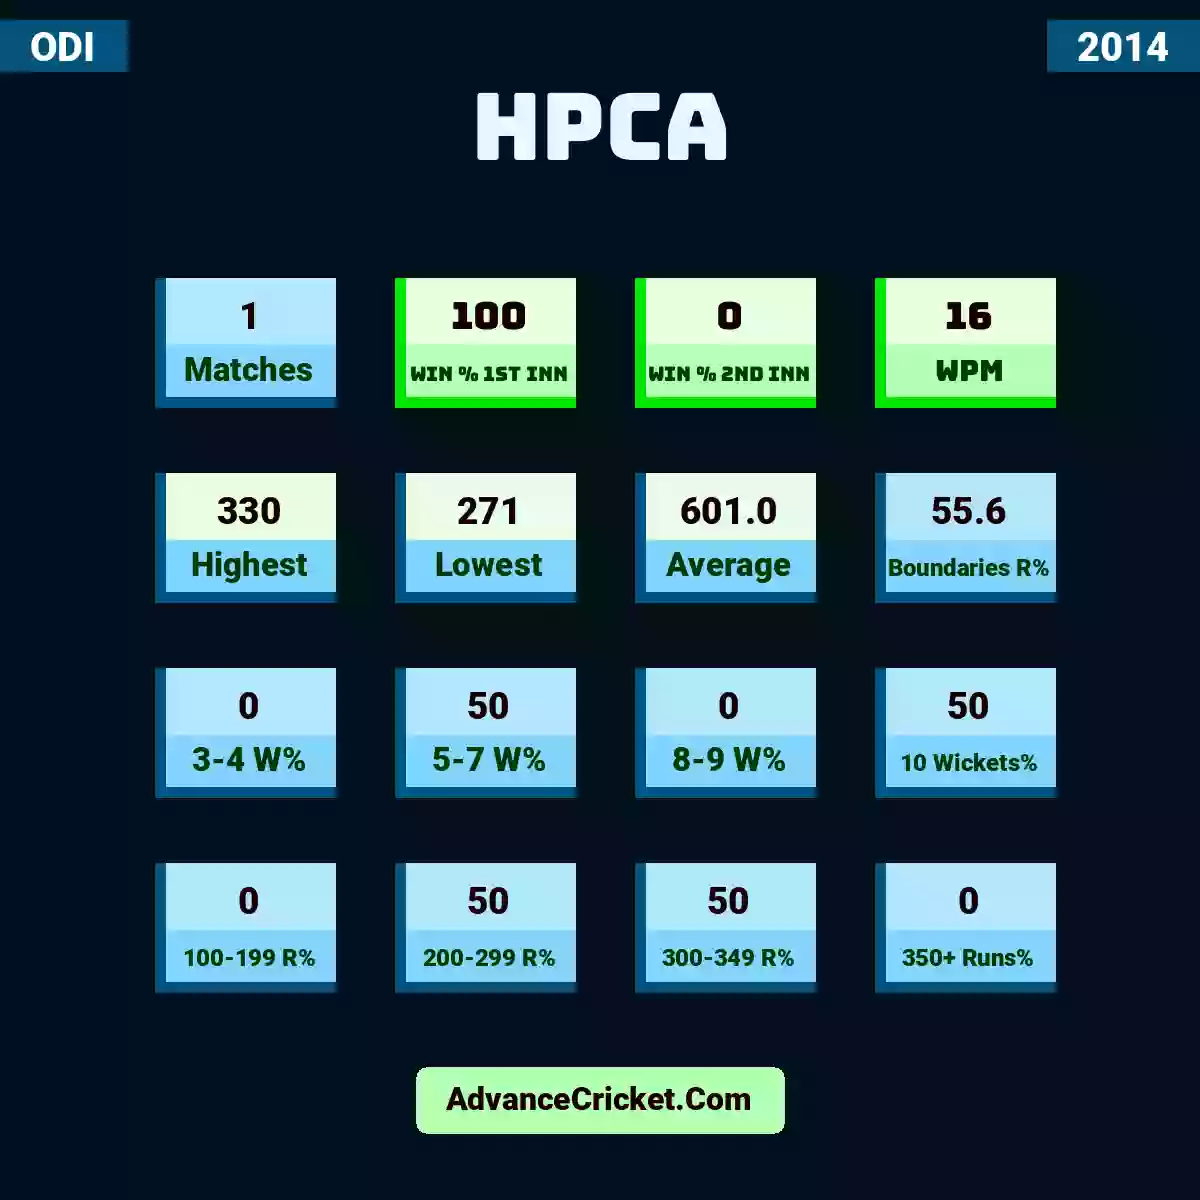 Image showing HPCA with Matches: 1, Win % 1st Inn: 100, Win % 2nd Inn: 0, WPM: 16, Highest: 330, Lowest: 271, Average: 601.0, Boundaries R%: 55.6, 3-4 W%: 0, 5-7 W%: 50, 8-9 W%: 0, 10 Wickets%: 50, 100-199 R%: 0, 200-299 R%: 50, 300-349 R%: 50, 350+ Runs%: 0.